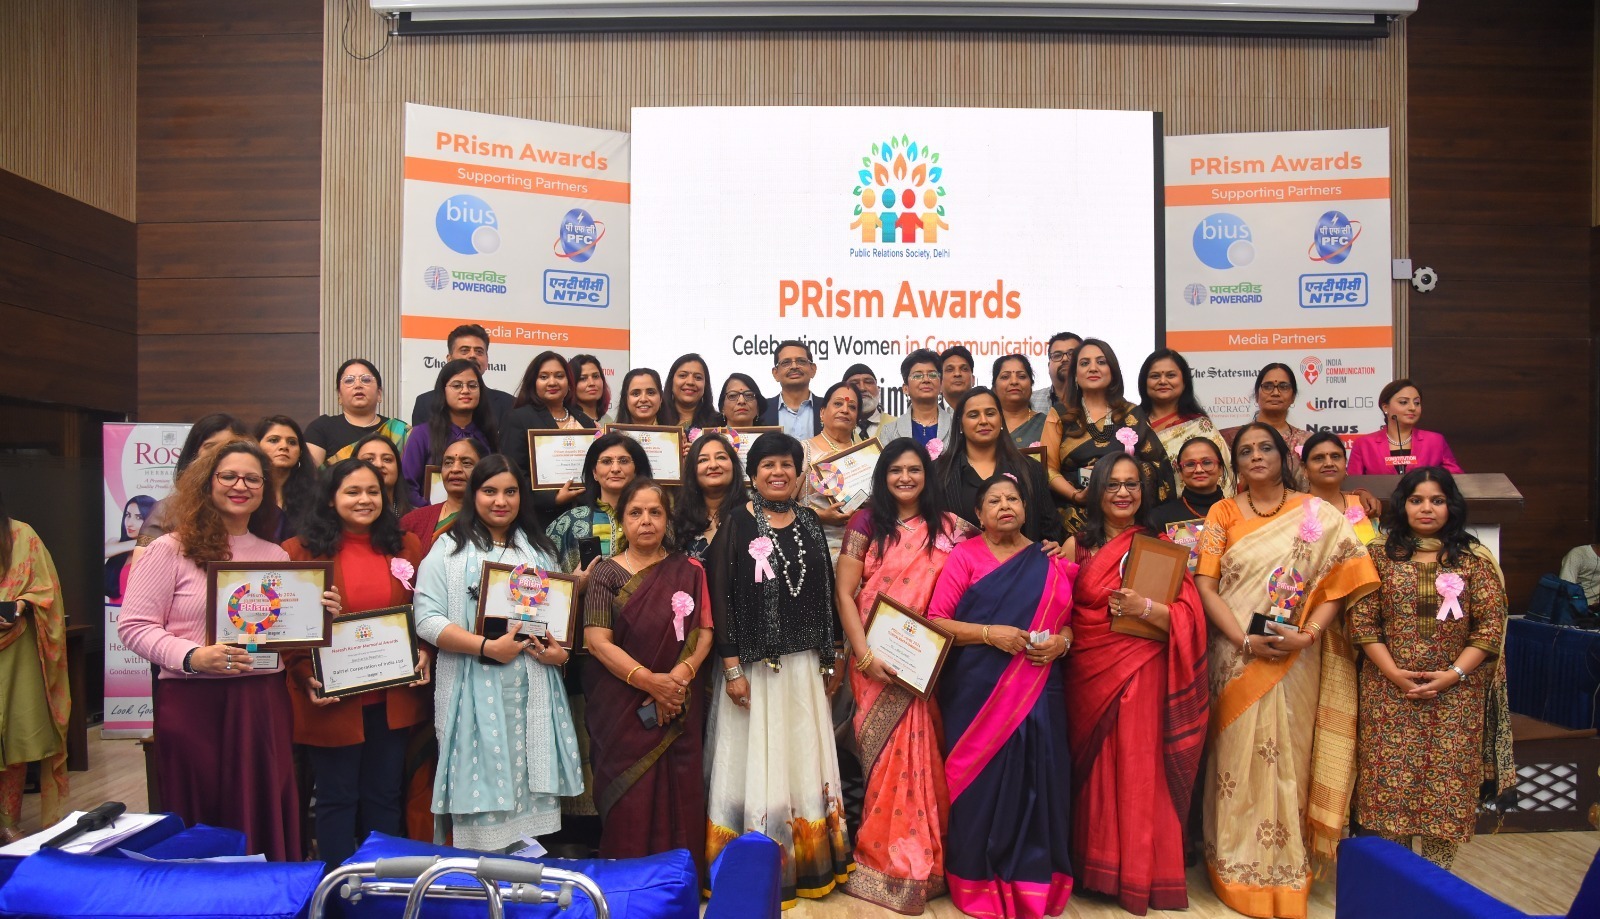 Public Relations Society Delhi honoured women achievers in PR and Communications on International Women's Day